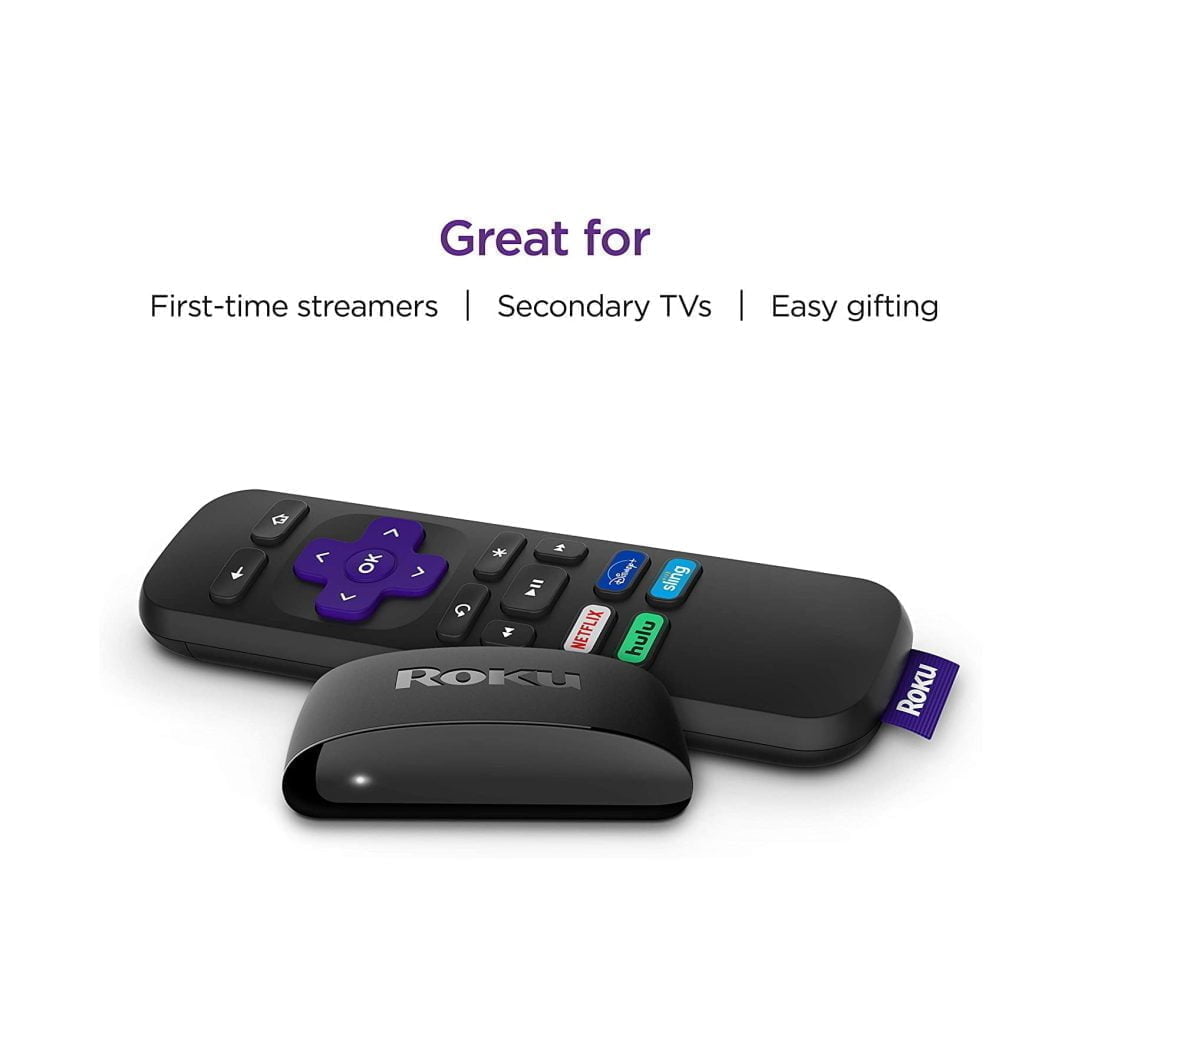 71Q L2M0Hzl. Ac Sl1500 Roku &Lt;H1&Gt;Roku Express | Hd Streaming Media Player With High Speed Hdmi Cable And Simple Remote&Lt;/H1&Gt; &Lt;Ul Class=&Quot;A-Unordered-List A-Vertical A-Spacing-Mini&Quot;&Gt; &Lt;Li&Gt;&Lt;Span Class=&Quot;A-List-Item&Quot;&Gt; Streaming Made Easy: Roku Express Lets You Stream Free, Live And Premium Tv Over The Internet Right To Your Tv; It’s Perfect For New Users, Secondary Tvs And Easy Gifting But Powerful Enough For Seasoned Pros &Lt;/Span&Gt;&Lt;/Li&Gt; &Lt;Li&Gt;&Lt;Span Class=&Quot;A-List-Item&Quot;&Gt; Quick And Easy Setup: Just Plug It Into Your Tv With The Included High Speed Hdmi Cable And Connect To The Internet To Get Started &Lt;/Span&Gt;&Lt;/Li&Gt; &Lt;Li&Gt;&Lt;Span Class=&Quot;A-List-Item&Quot;&Gt; Tons Of Power, Tons Of Fun: Compact And Fast, You’ll Stream Your Favorites With Ease; With Movies And Series On Apple Tv+, Prime Video, Netflix, Disney+, Hbo Max, Showtime, And Hulu With Live Tv, Enjoy The Most Talked About Entertainment &Lt;/Span&Gt;&Lt;/Li&Gt; &Lt;Li&Gt;&Lt;Span Class=&Quot;A-List-Item&Quot;&Gt; Simple Remote: Incredibly Easy To Use, This Remote Features Shortcut Buttons To Popular Streaming Channels &Lt;/Span&Gt;&Lt;/Li&Gt; &Lt;Li&Gt;&Lt;Span Class=&Quot;A-List-Item&Quot;&Gt; Endless Entertainment: Stream It All, Including Free Tv, Live News, Sports, And More; Never Miss Award-Winning Shows, The Latest Blockbuster Hits, And More; Access 500, 000+ Movies And Tv Episodes; Stream What You Love And Cut Back On Cable Tv Bills &Lt;/Span&Gt;&Lt;/Li&Gt; &Lt;Li&Gt;&Lt;Span Class=&Quot;A-List-Item&Quot;&Gt; Enjoy Free Tv Channels: Stream Live Tv, 24/7 News, Sports, Movies, Shows, And More On The Roku Channel, Plus A Huge Collection Of Free Entertainment From Top Channels On Featured Free &Lt;/Span&Gt;&Lt;/Li&Gt; &Lt;/Ul&Gt; &Lt;Div Class=&Quot;A-Row A-Expander-Container A-Expander-Inline-Container&Quot;&Gt; &Lt;Div Class=&Quot;A-Expander-Content A-Expander-Extend-Content A-Expander-Content-Expanded&Quot;&Gt; &Lt;Ul Class=&Quot;A-Unordered-List A-Vertical A-Spacing-None&Quot;&Gt; &Lt;Li&Gt;&Lt;Span Class=&Quot;A-List-Item&Quot;&Gt;The Free Roku Mobile App: Turn Your Ios Or Android Device Into The Ultimate Streaming Companion; Control Your Roku Express Media Player Or Roku Tv, Use Voice Search, Enjoy Private Listening, And More On Ios And Android&Lt;/Span&Gt;&Lt;/Li&Gt; &Lt;Li&Gt;&Lt;Span Class=&Quot;A-List-Item&Quot;&Gt;Automatic Software Updates: Get The Most Up To Date Software Including All The Latest Features And Available Channels Without Even Thinking About It&Lt;/Span&Gt;&Lt;/Li&Gt; &Lt;Li&Gt;&Lt;Span Class=&Quot;A-List-Item&Quot;&Gt;Works With Popular Voice Assistants: Enjoy Easy Voice Control With Siri, Alexa, Or Hey Google&Lt;/Span&Gt;&Lt;/Li&Gt; &Lt;/Ul&Gt; &Lt;/Div&Gt; &Lt;/Div&Gt; Roku Express Roku Express | Hd Streaming Media Player With High Speed Hdmi Cable And Simple Remote